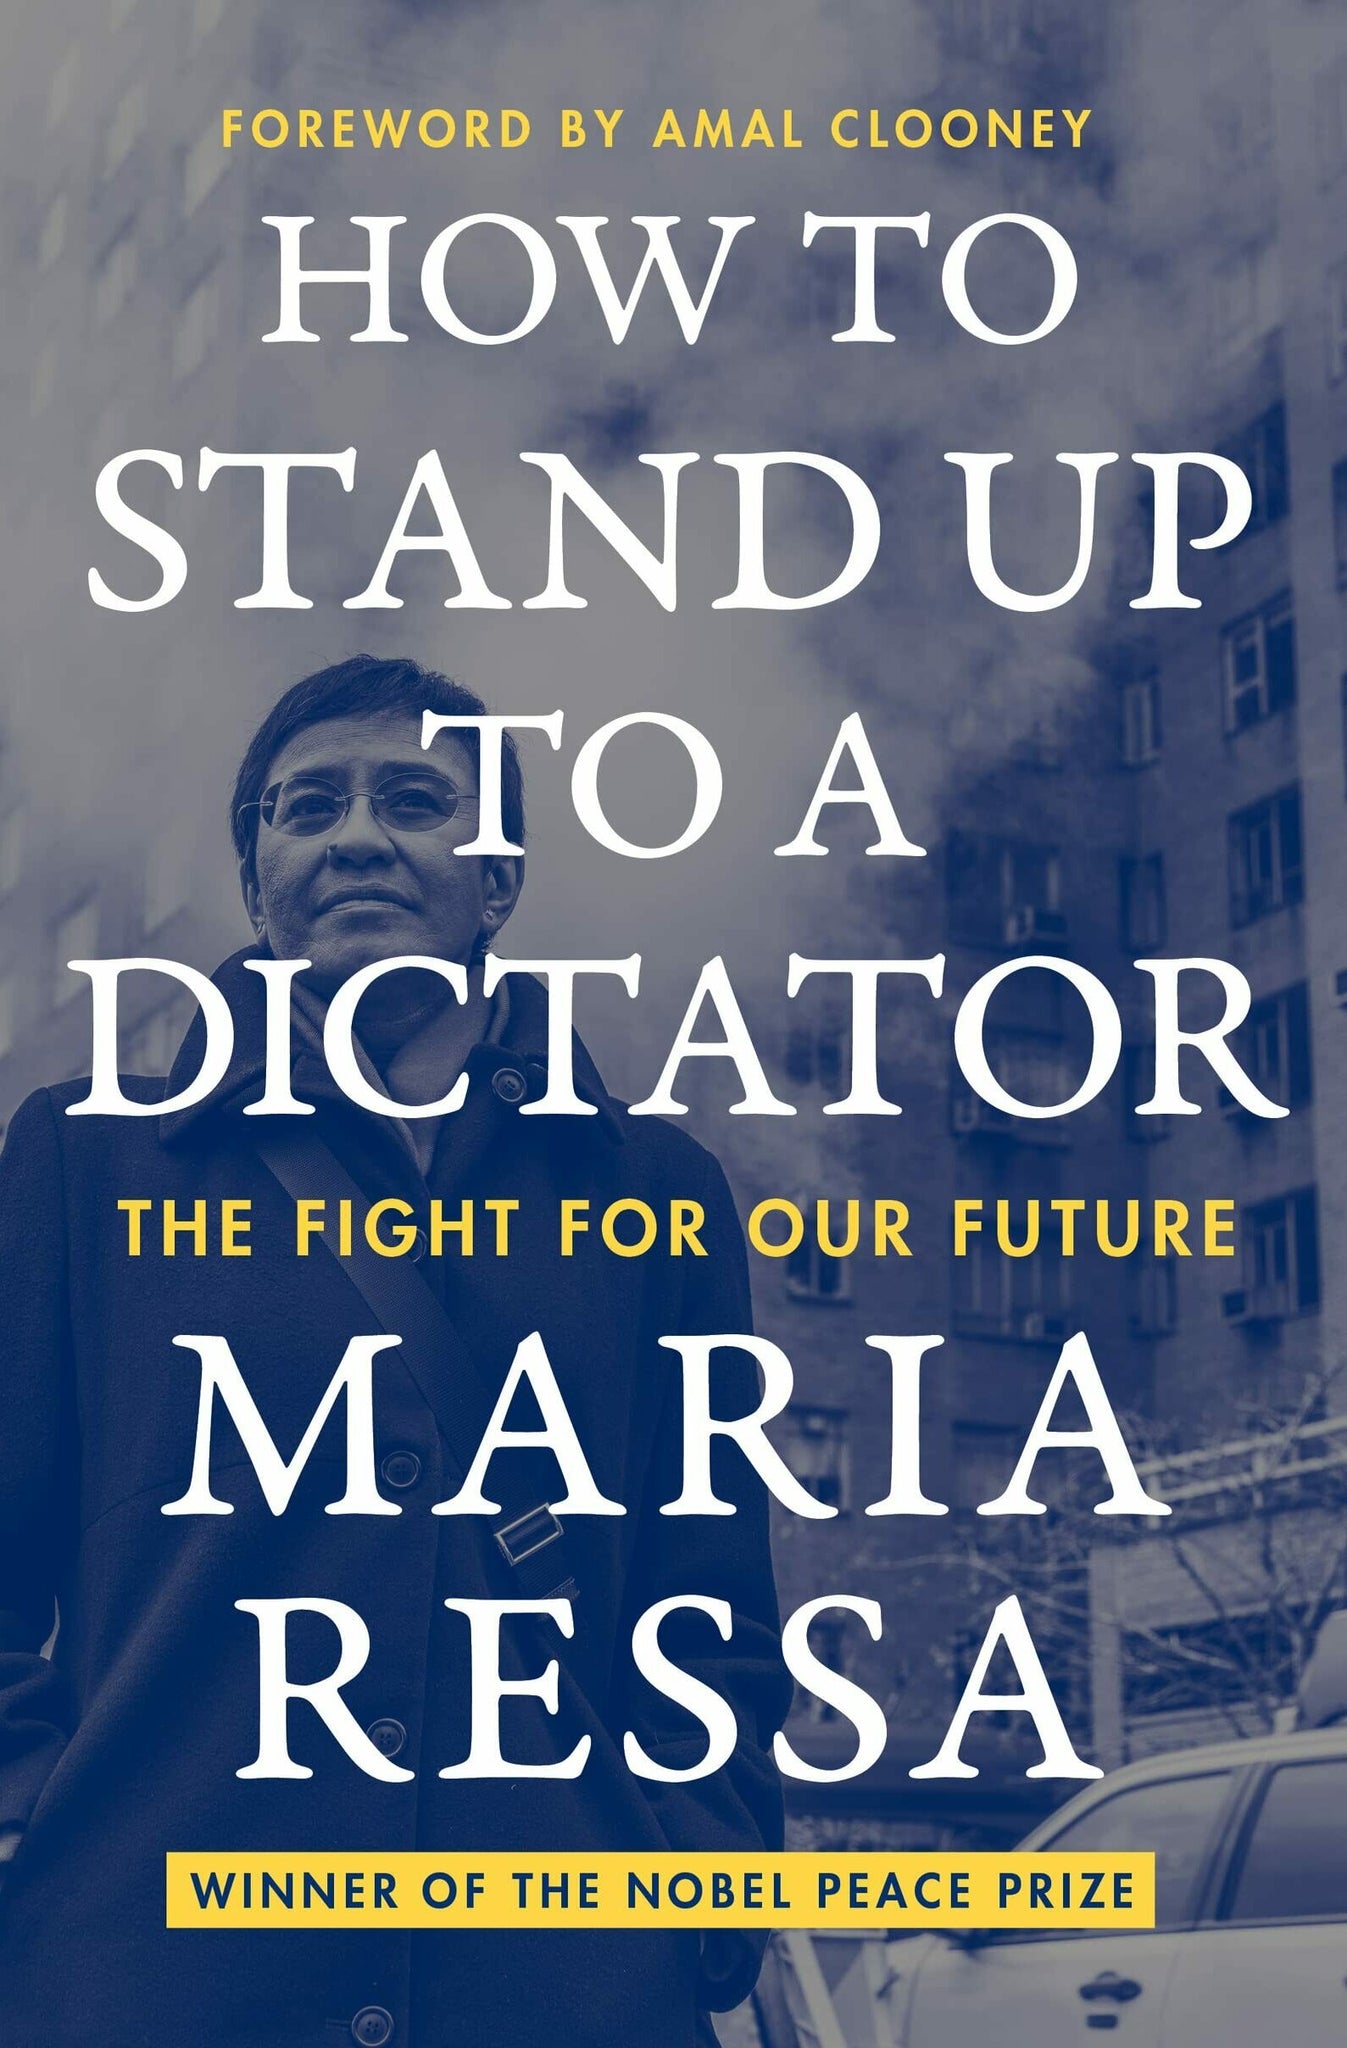 How to Stand Up to a Dictator by Maria Ressa (HC)